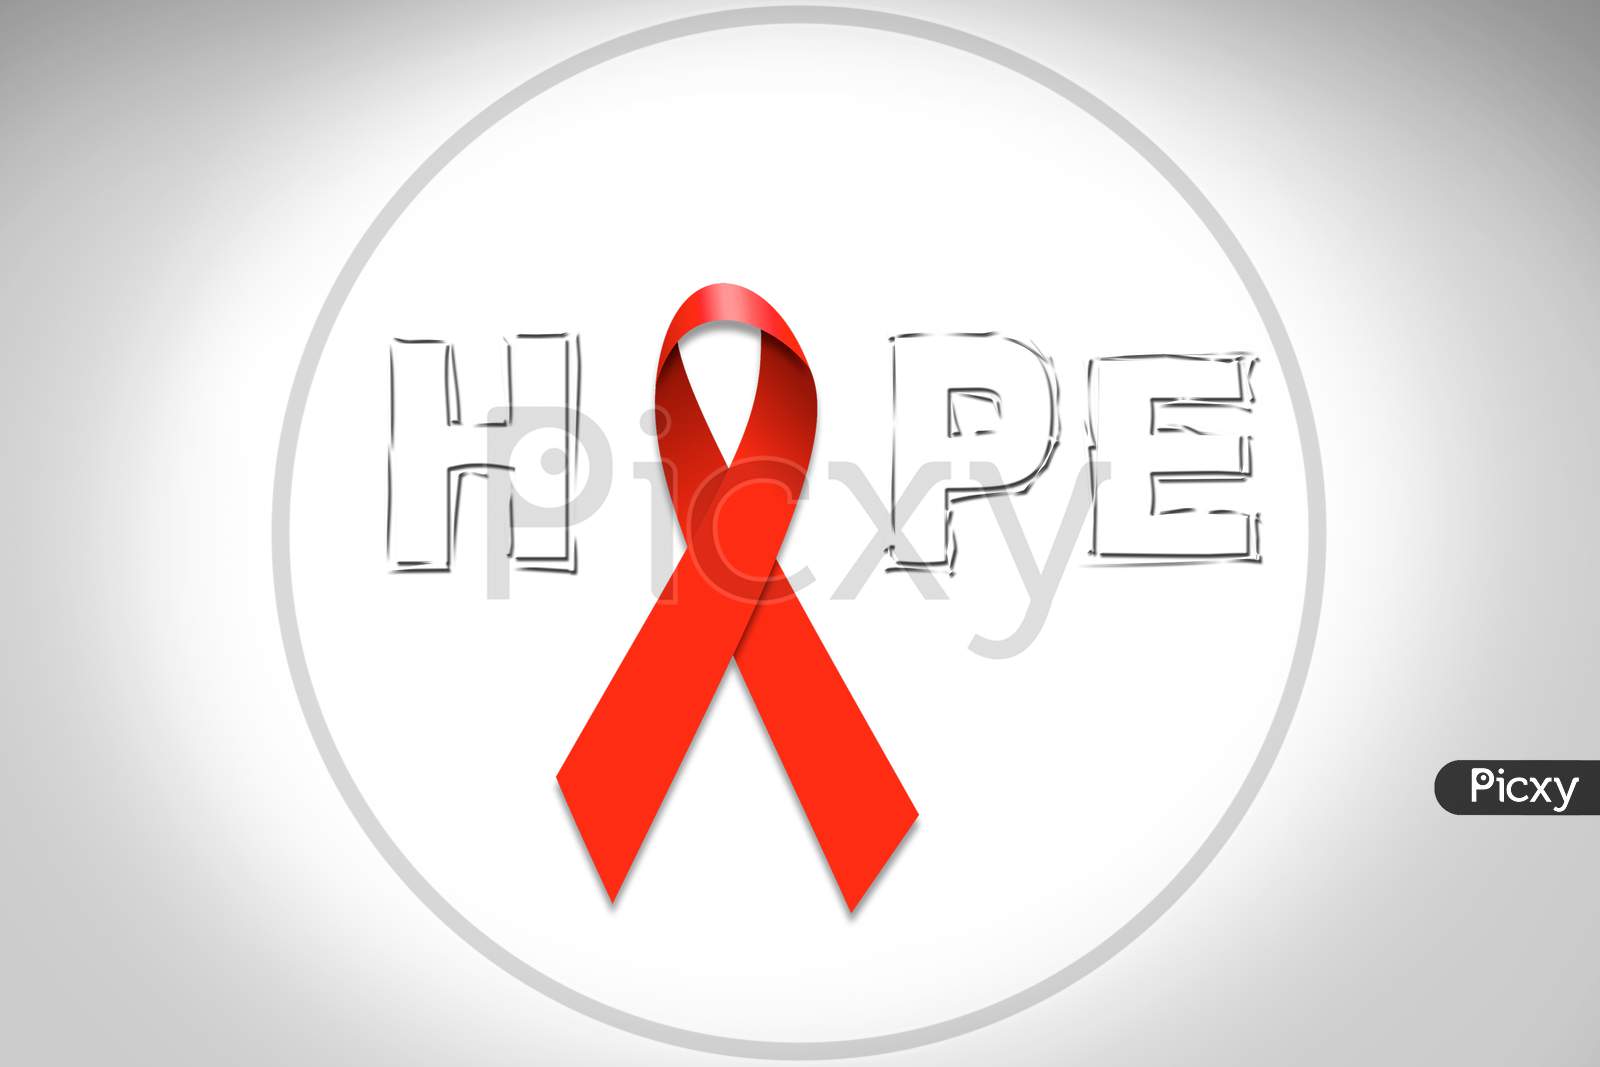 Aids Awareness Red Ribbon with HOPE Text